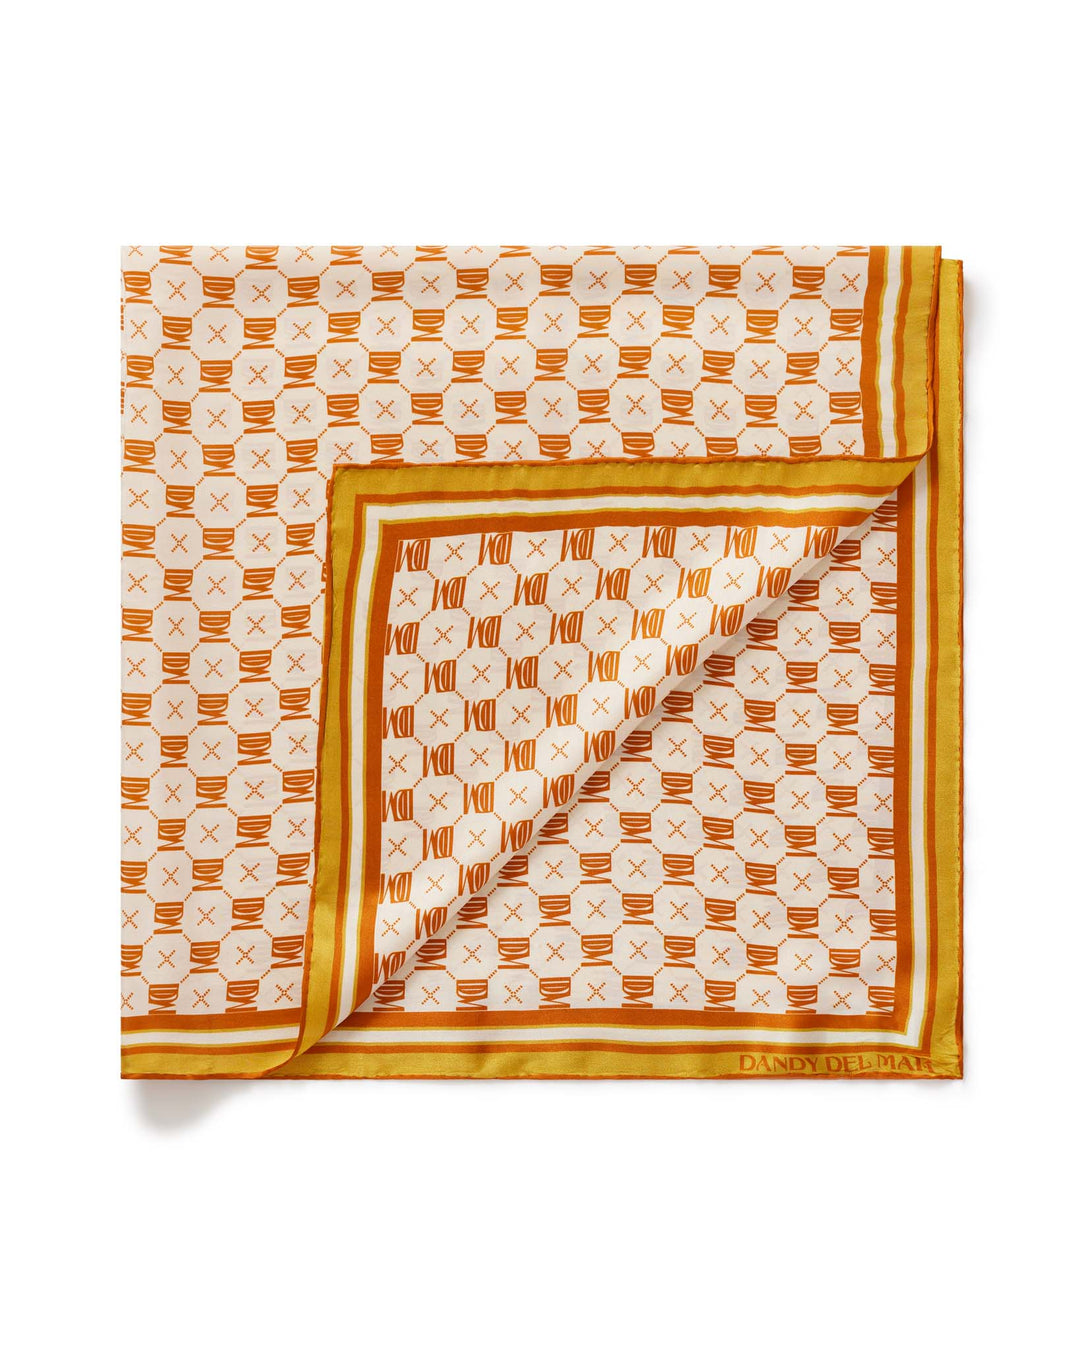 orange scarf that can use by men and women both